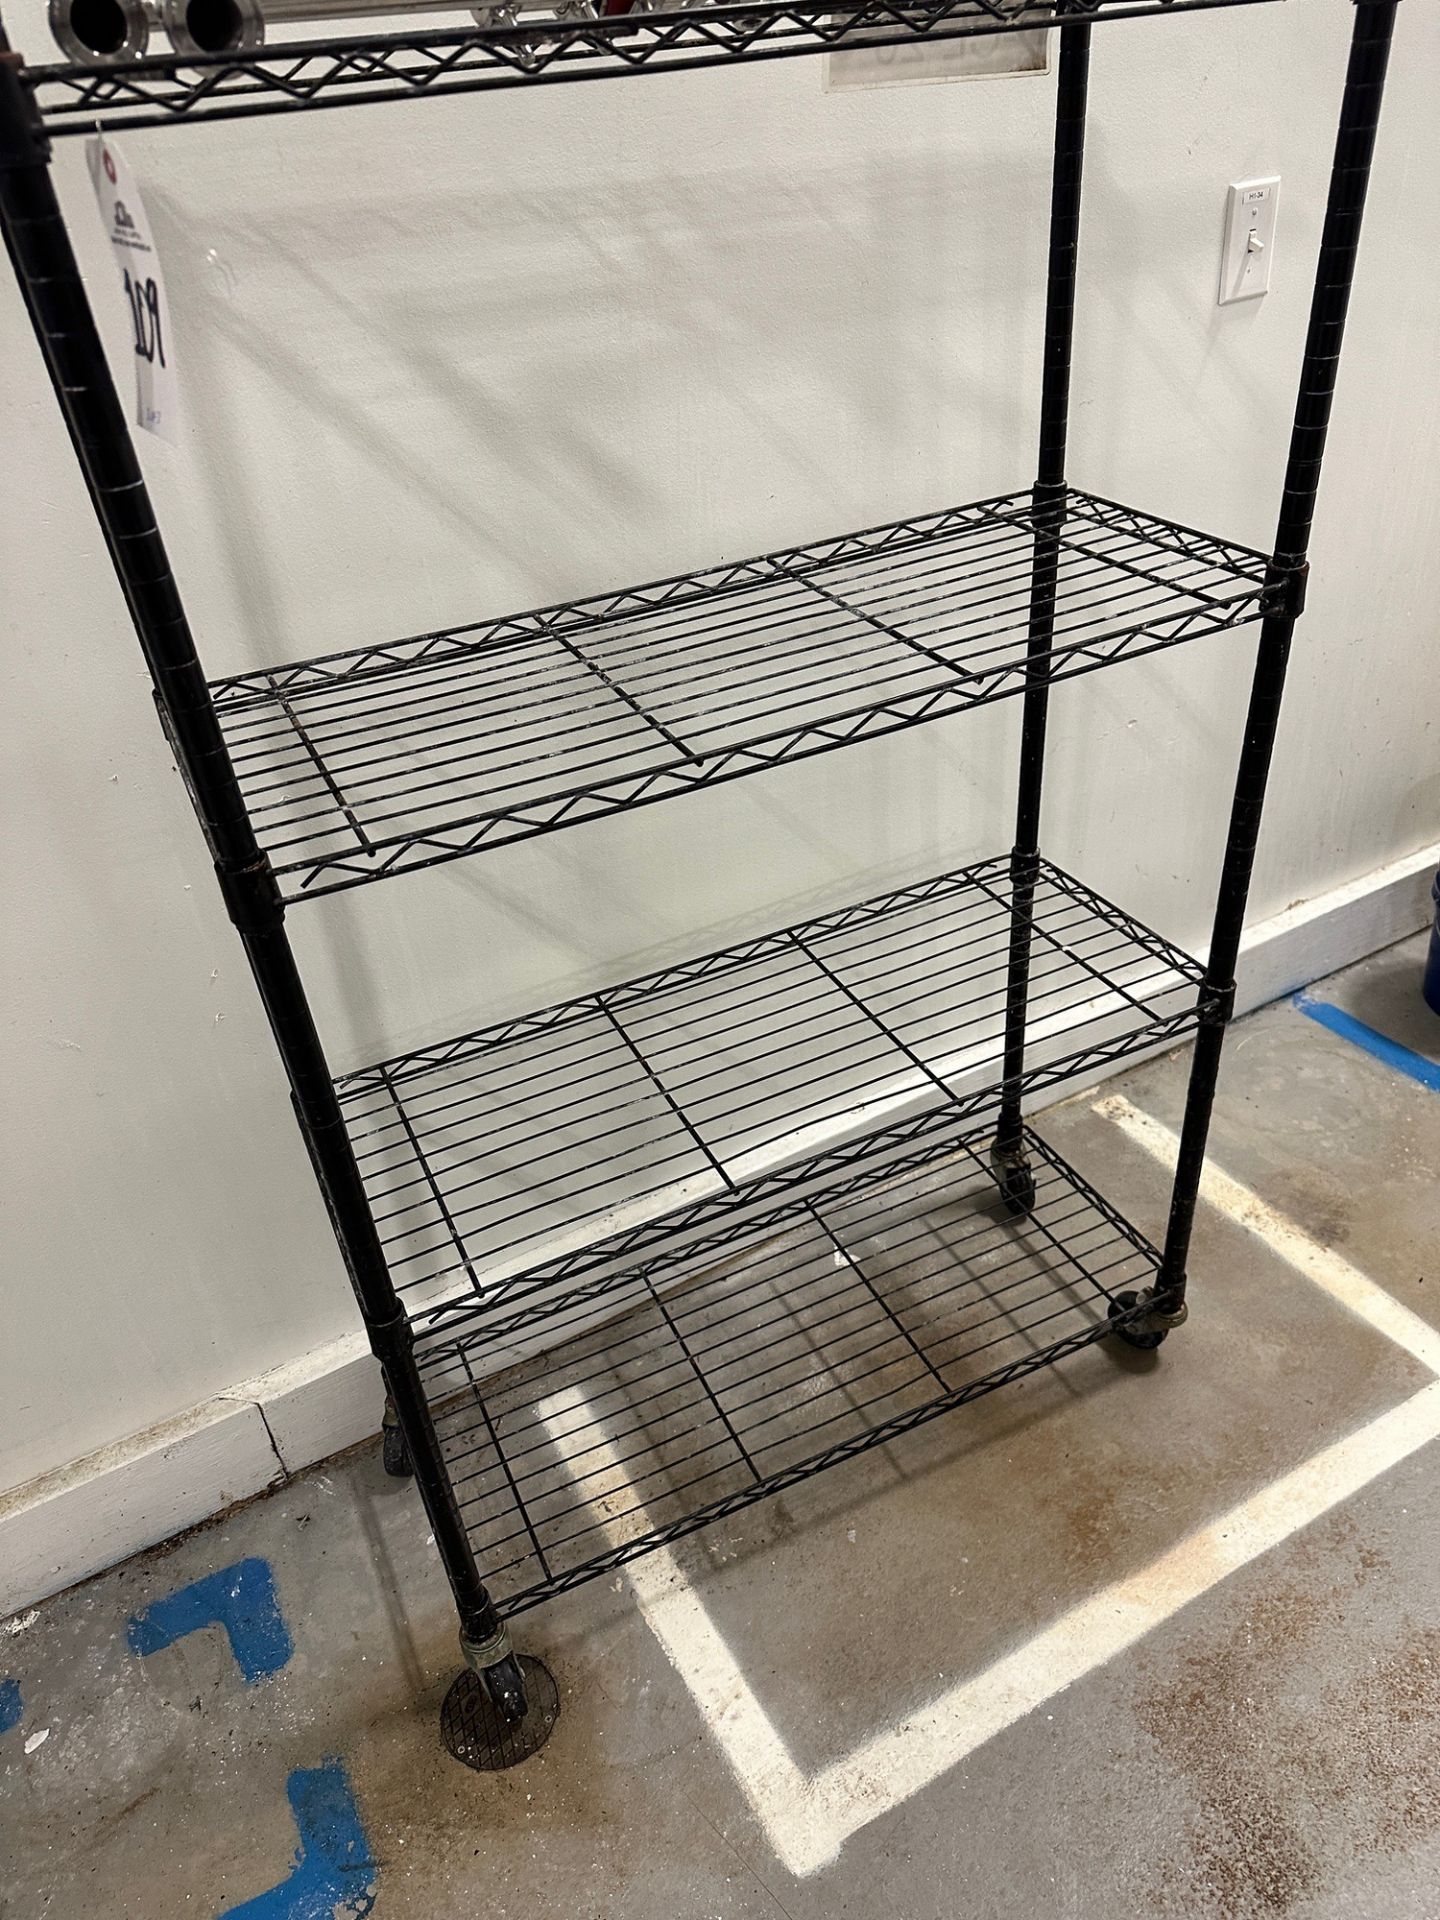 Lot of (2) 4-Shelf Wall Hung Wire Shelving Units (Approx. 4'x 18") and (1) 3' x 14" Wire Shelving Un - Image 3 of 3